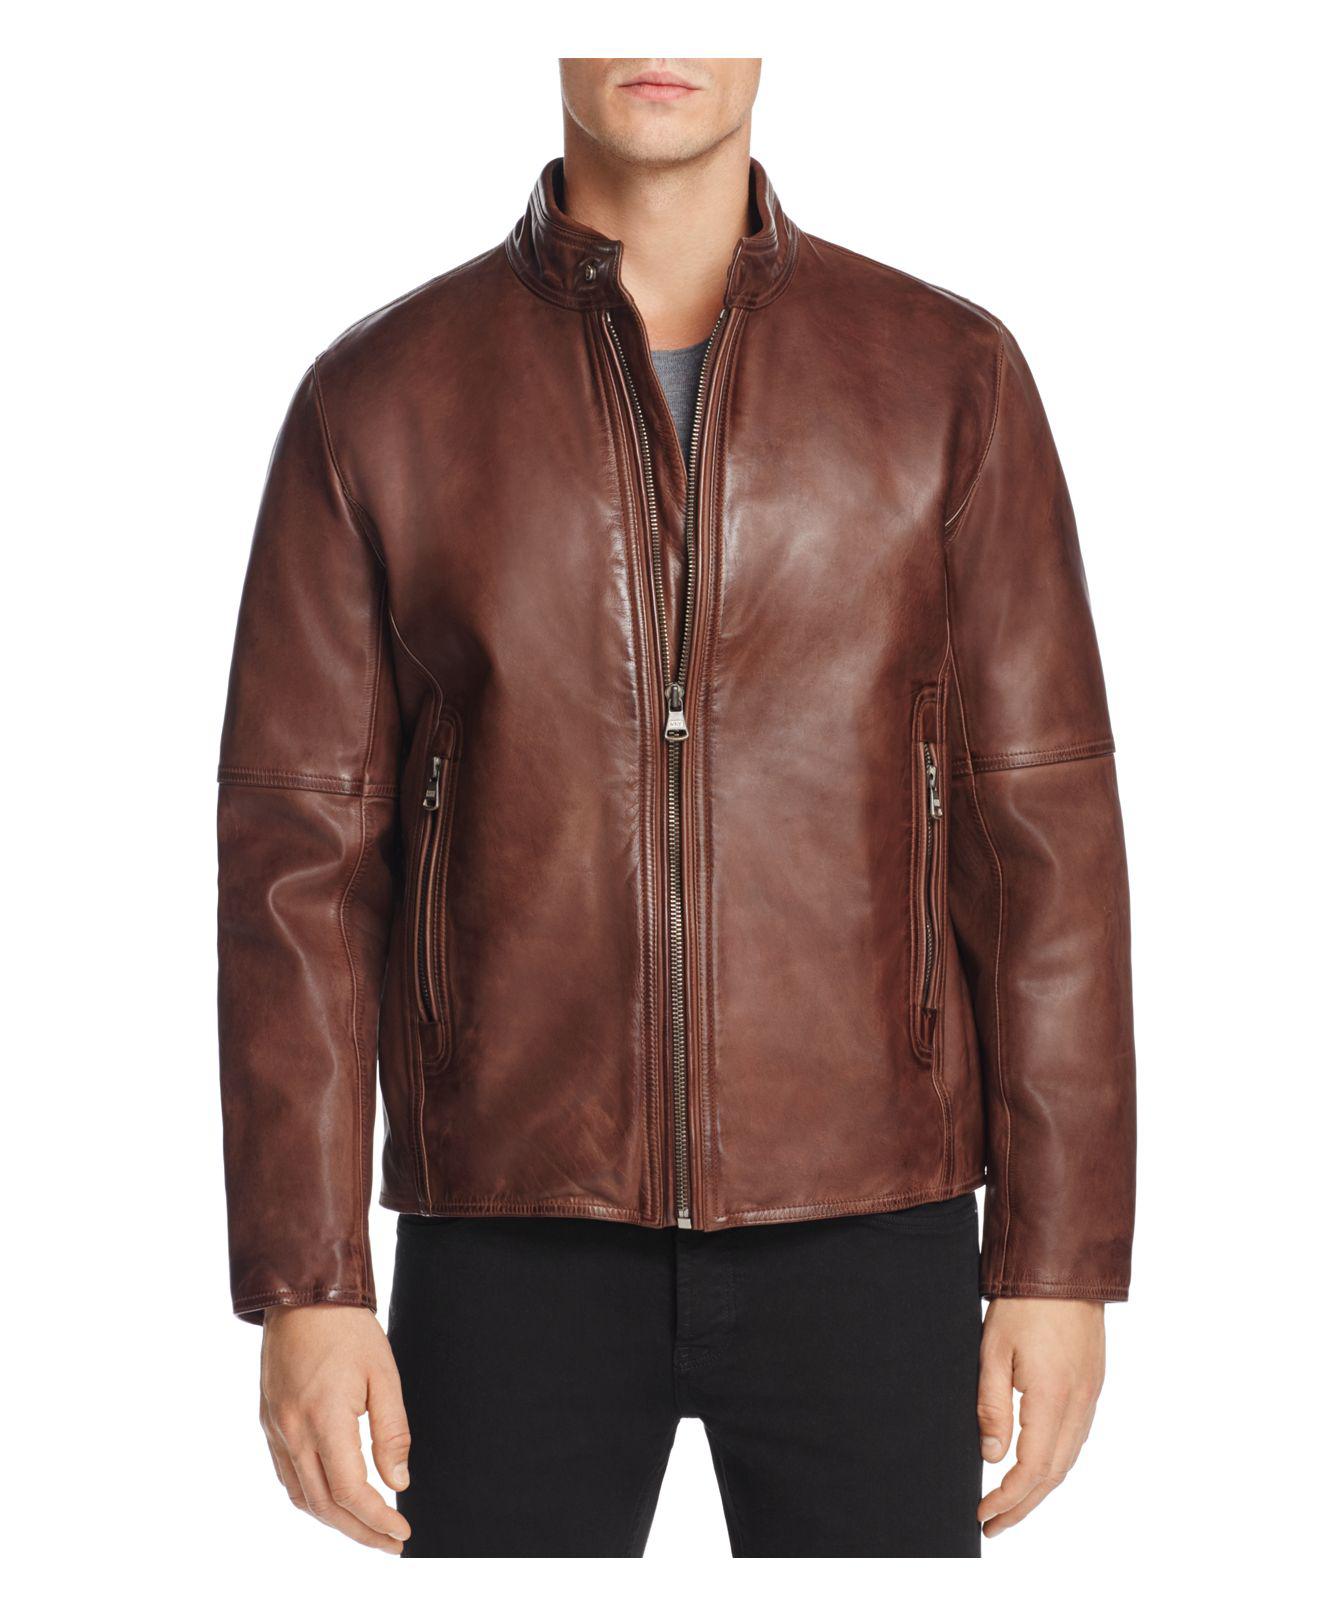 Lyst - Marc New York Emerson Moto Leather Jacket in Brown for Men